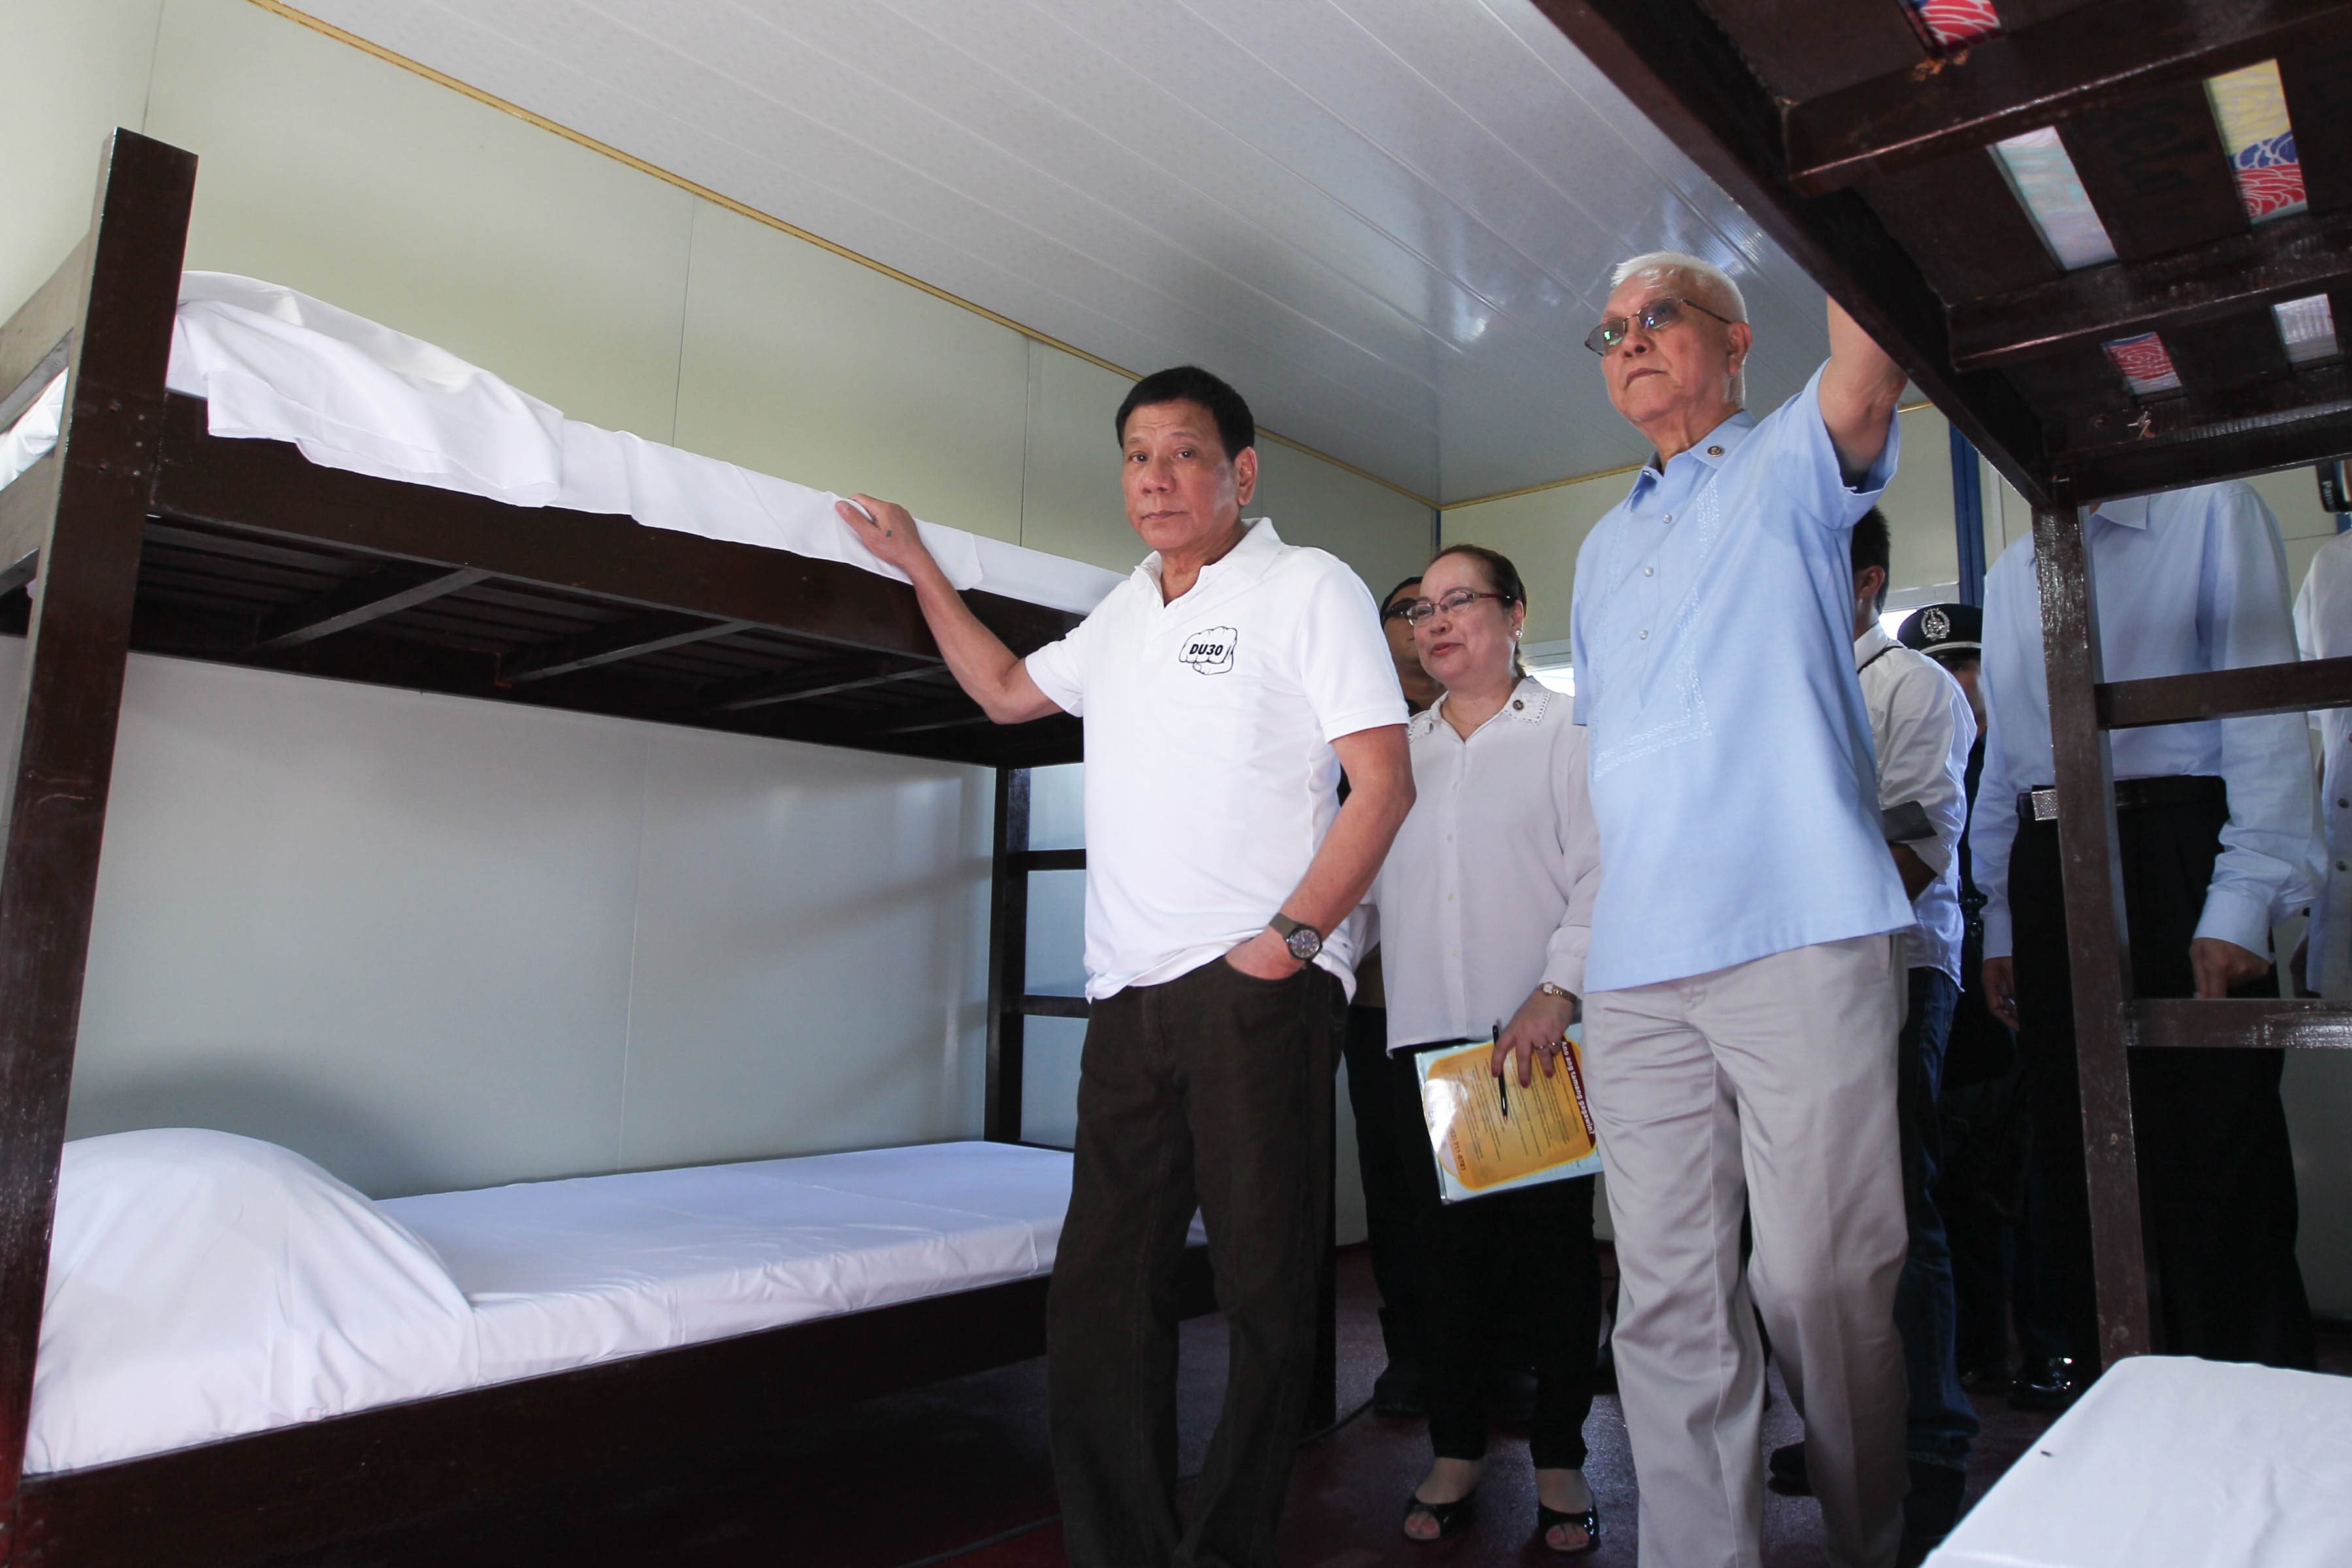 TOUR. President Duterte inspects one of the dormitory rooms with Cabinet Secretary Leoncio Evasco Jr. Photo by Ace R Morandante/PPD 